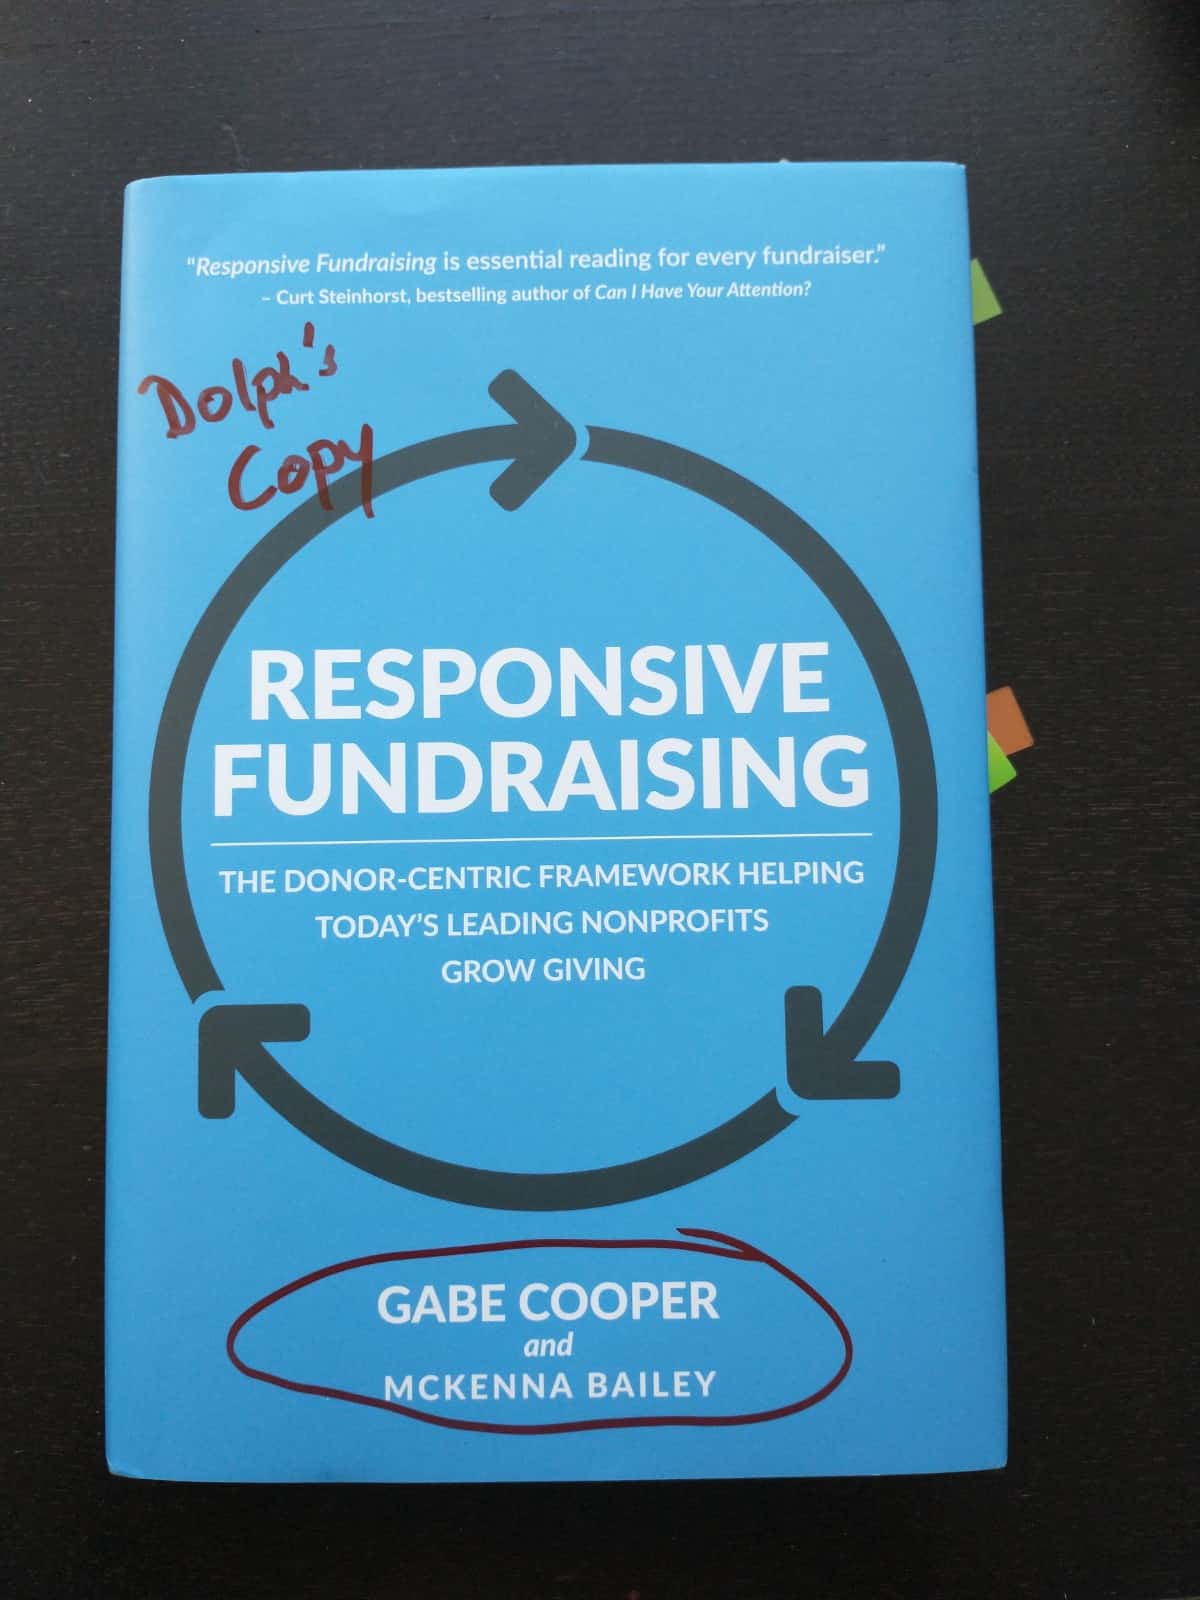 Consider implementing responsive fundraising in your nonprofit